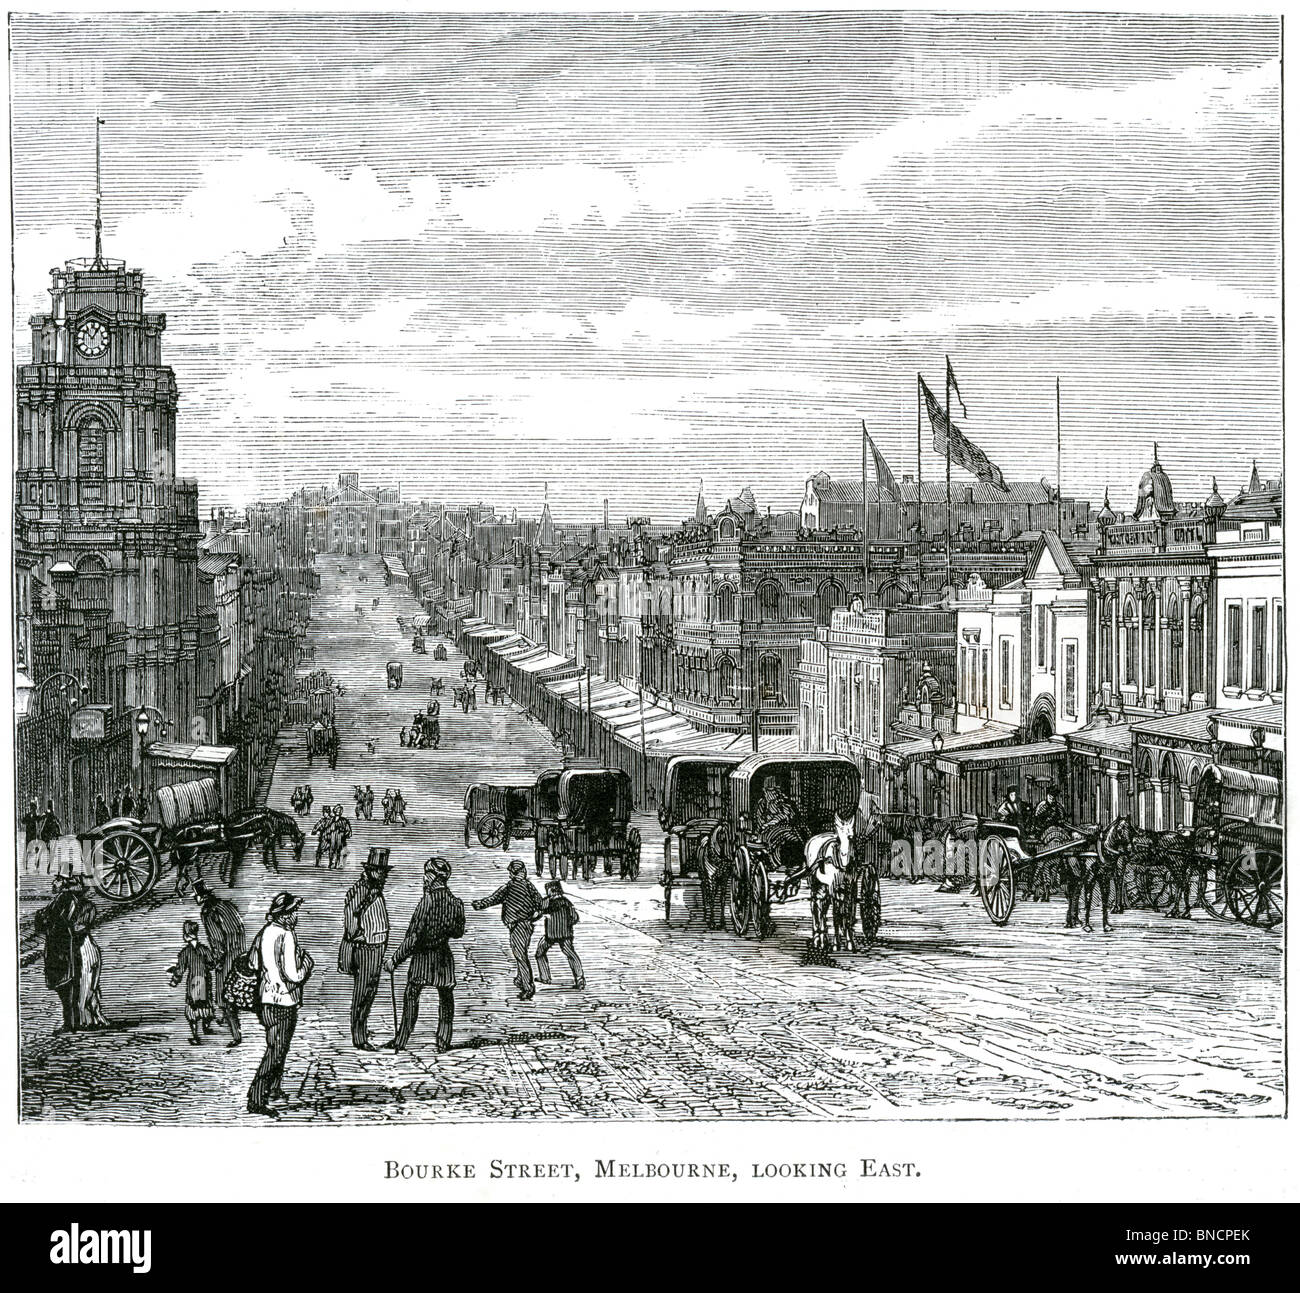 An engraving of Bourke Street, Melbourne, Victoria, Australia - published in a book printed in 1886. Stock Photo